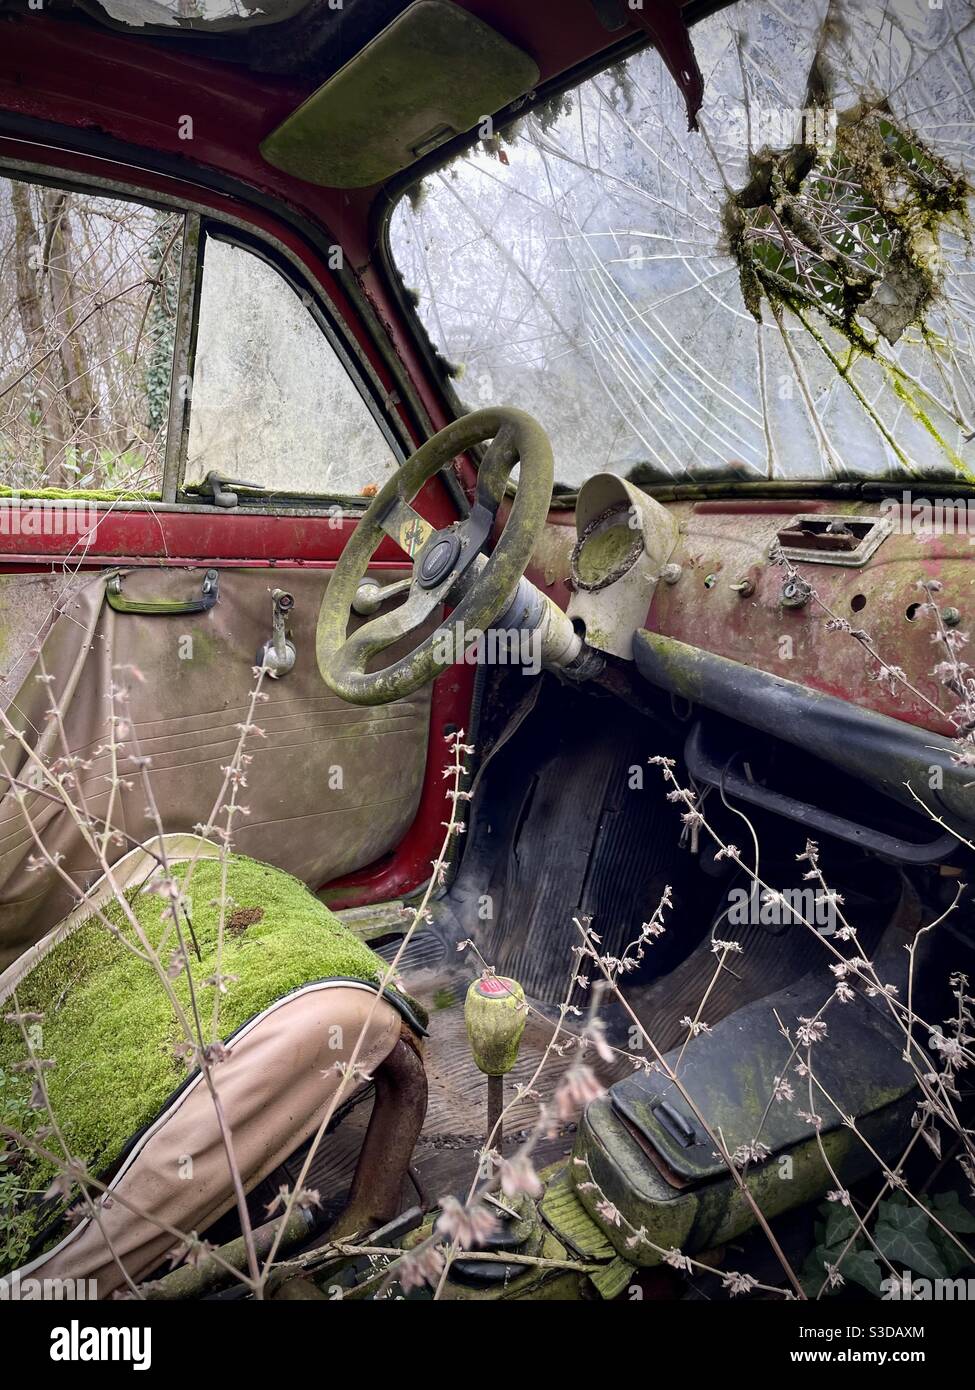 Interior of an old Fiat 500 car abandoned in a rural area in Tuscany Italy Stock Photo